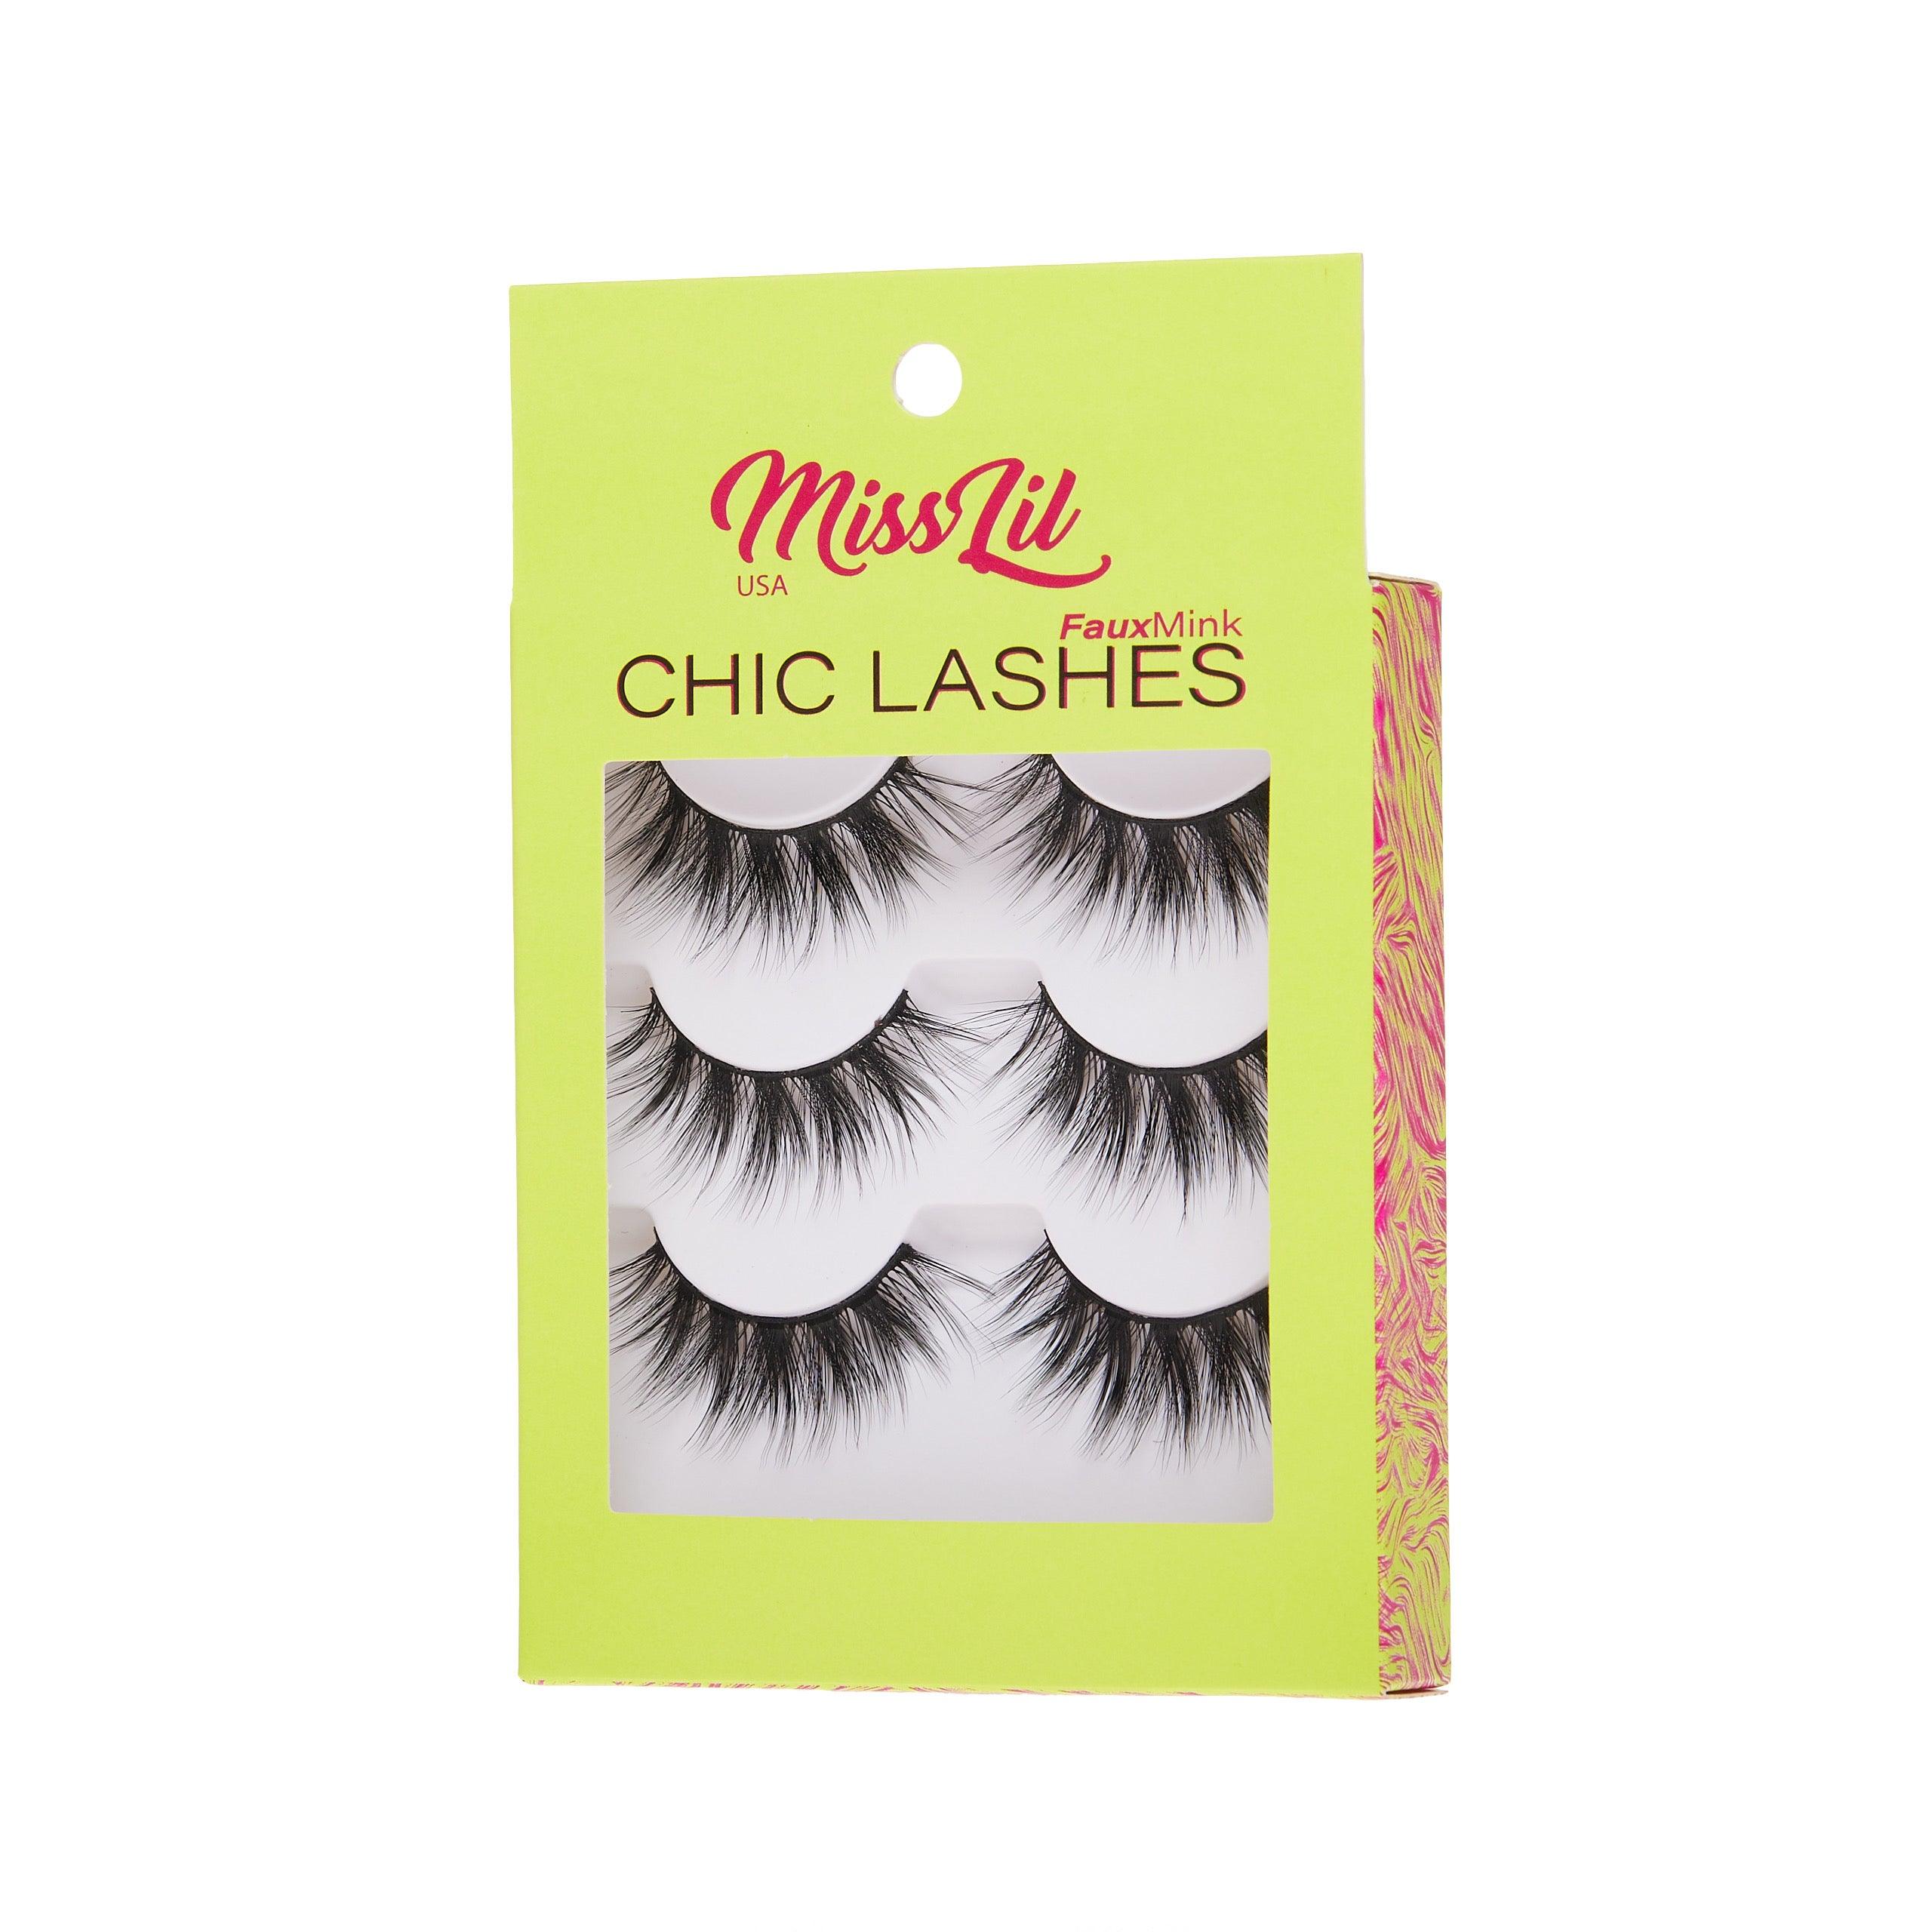 3-Pair Faux Mink Eyelashes - Chic Lashes Collection #36 - Pack of 3 - Miss Lil USA